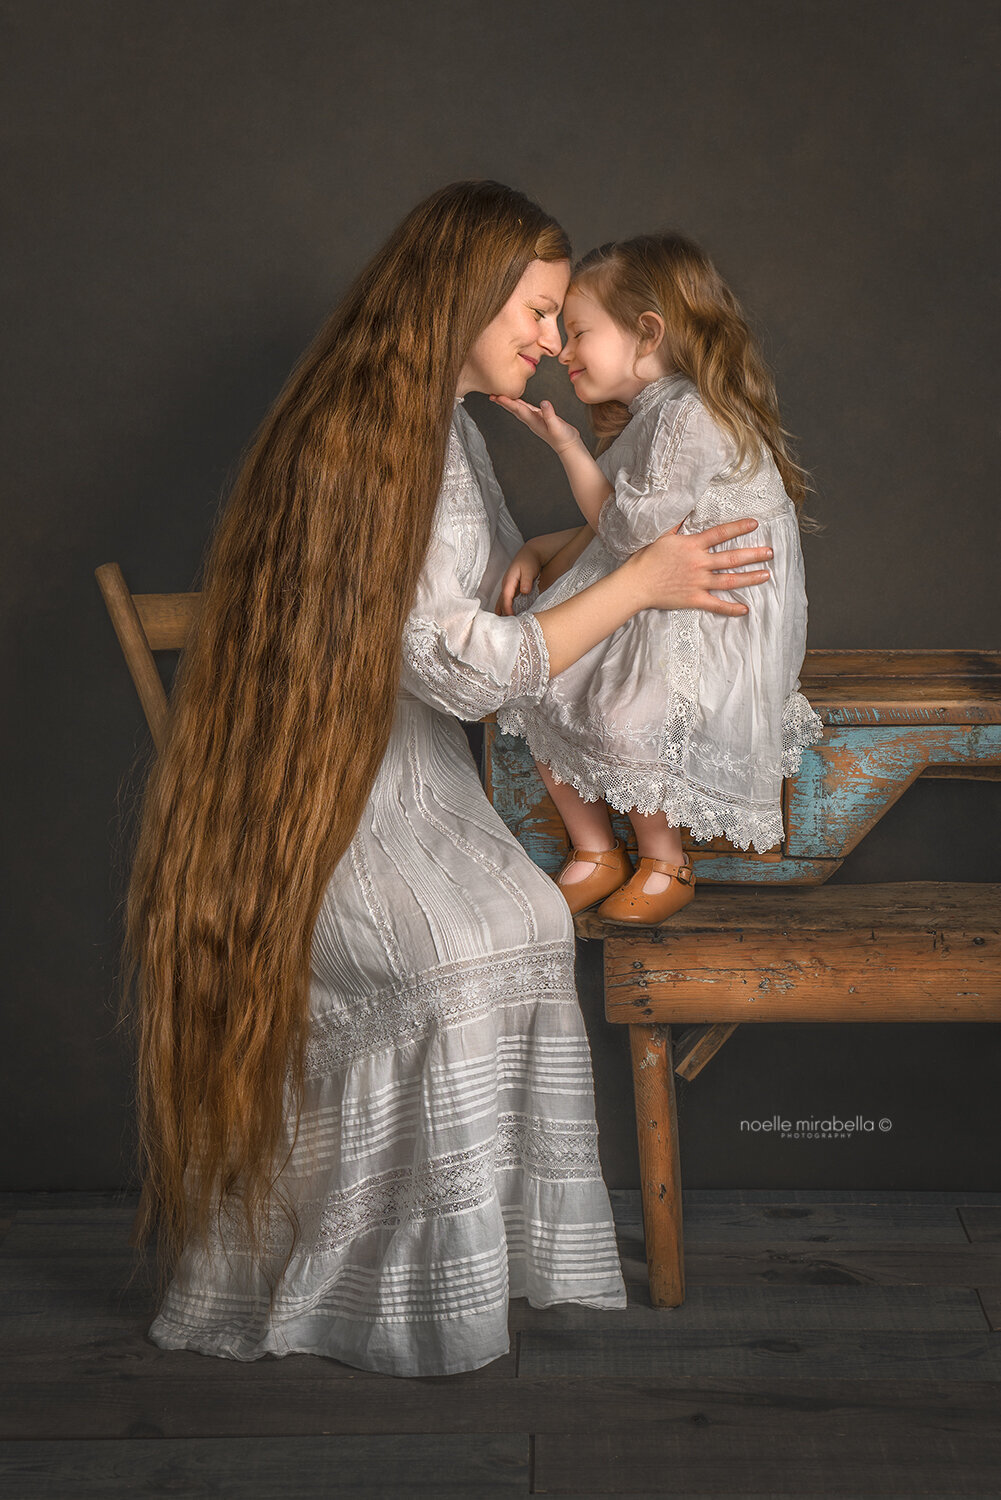 Mother and daughter sitting at a table engaged in a warm embrace.